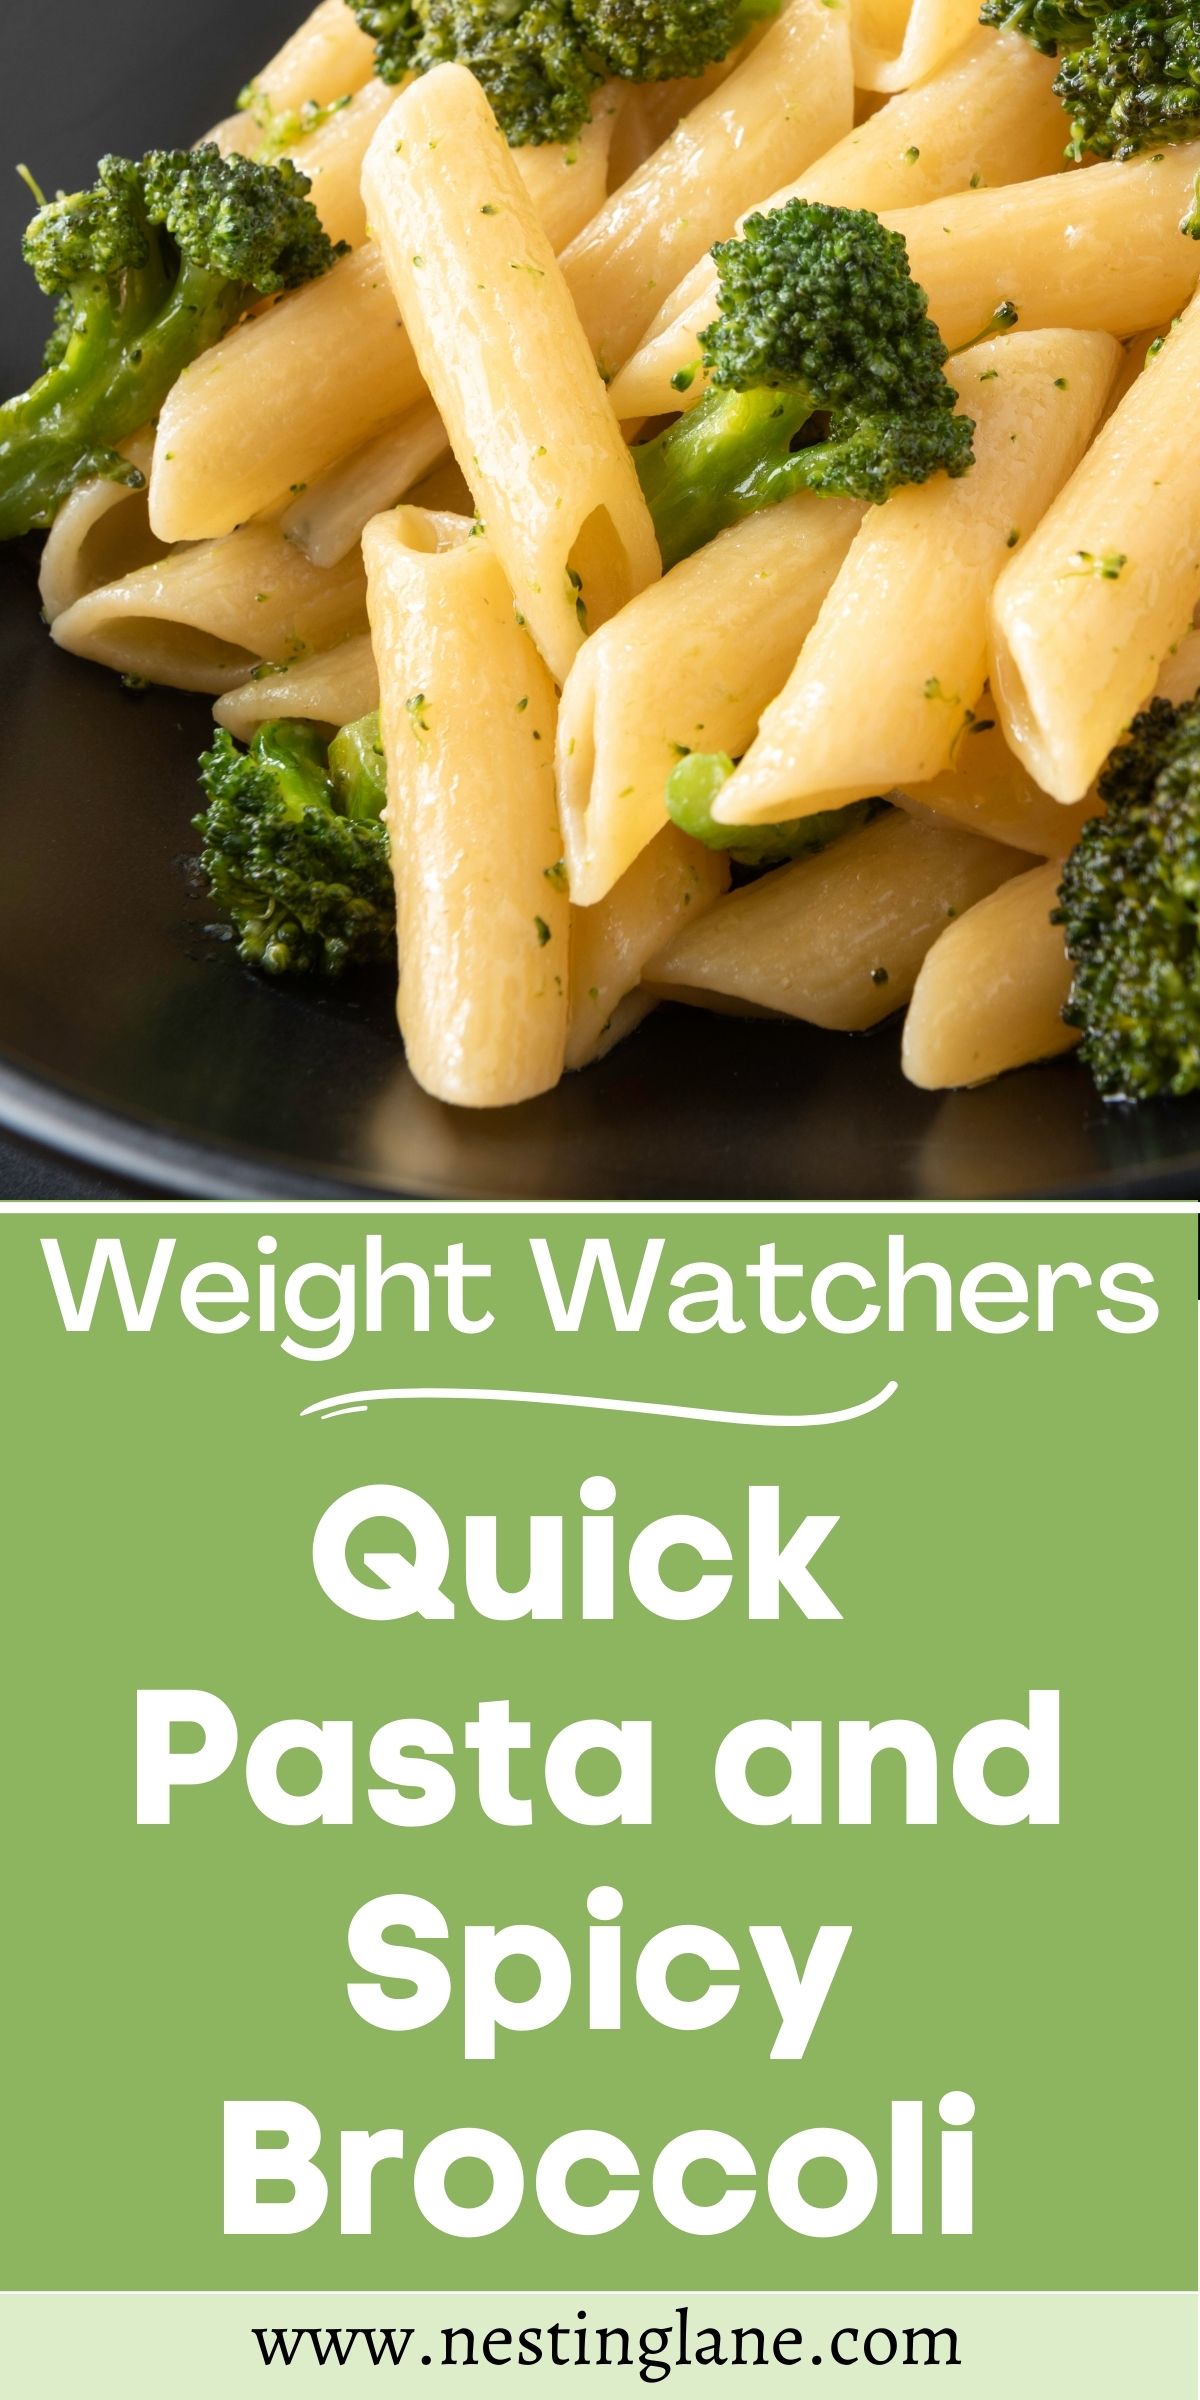 Graphic for Pinterest of Quick Weight Watchers Pasta and Spicy Broccoli Recipe.